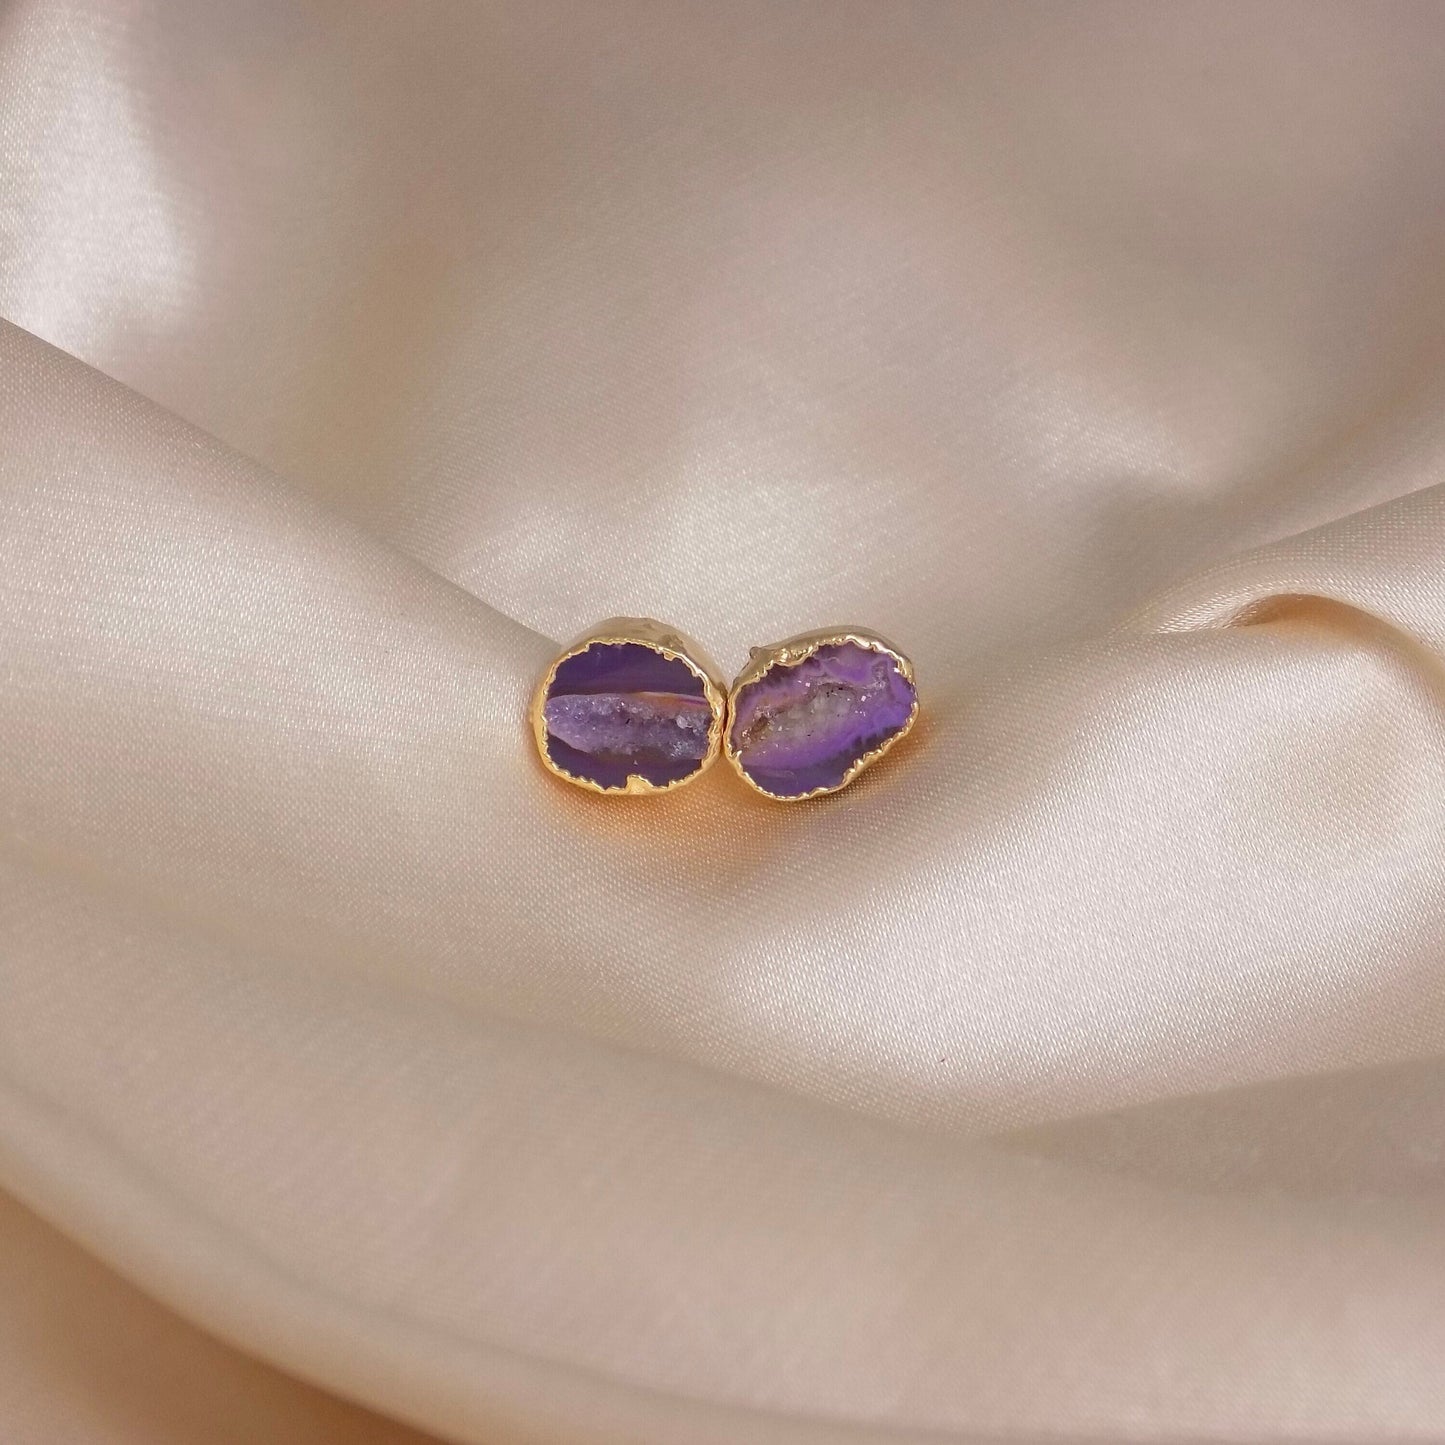 Unique Crystal Stud Earrings, Purple Geode Earrings, Bridesmaid Gifts, Gift For Wife, G15-48